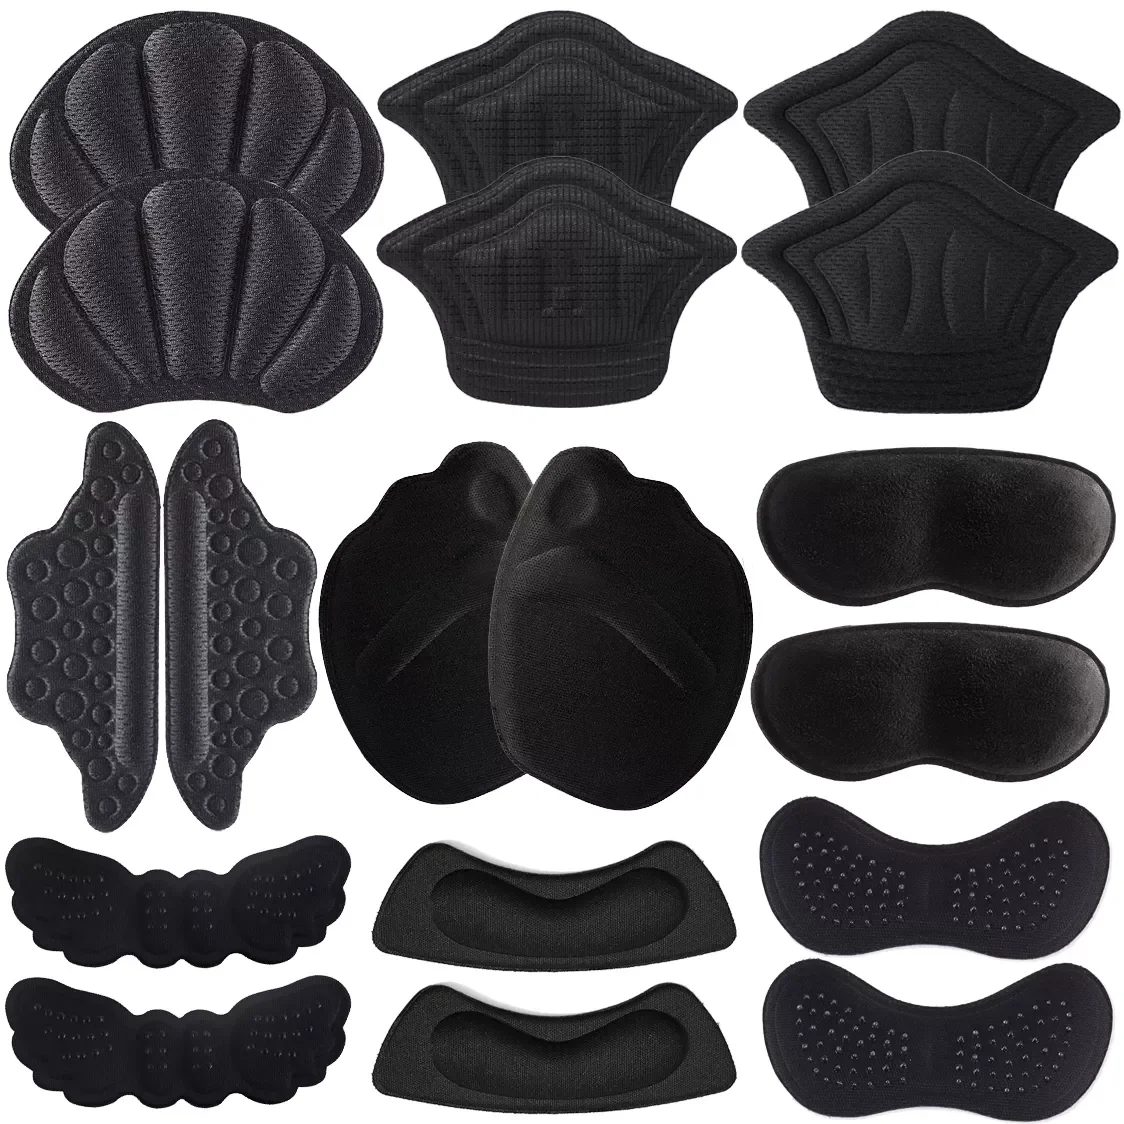 

Shoe Pads Sports Shoes Pad & High Heel Ankle Antiwear Cushion Feet Insert Insoles Heel Protector Adhesive Insole Brioche